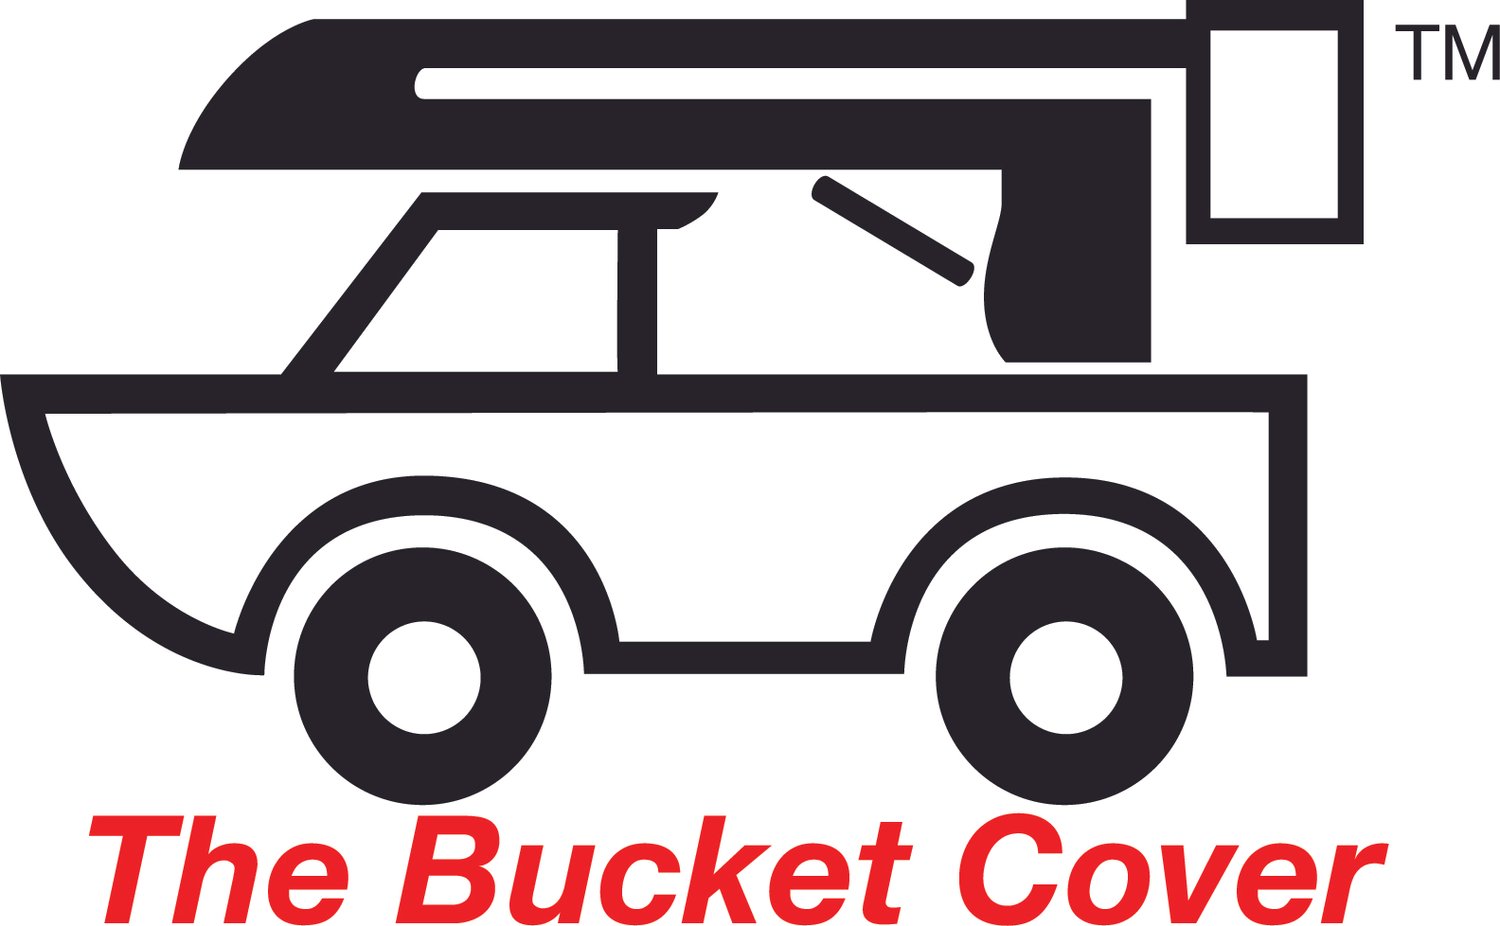 The Bucket Cover